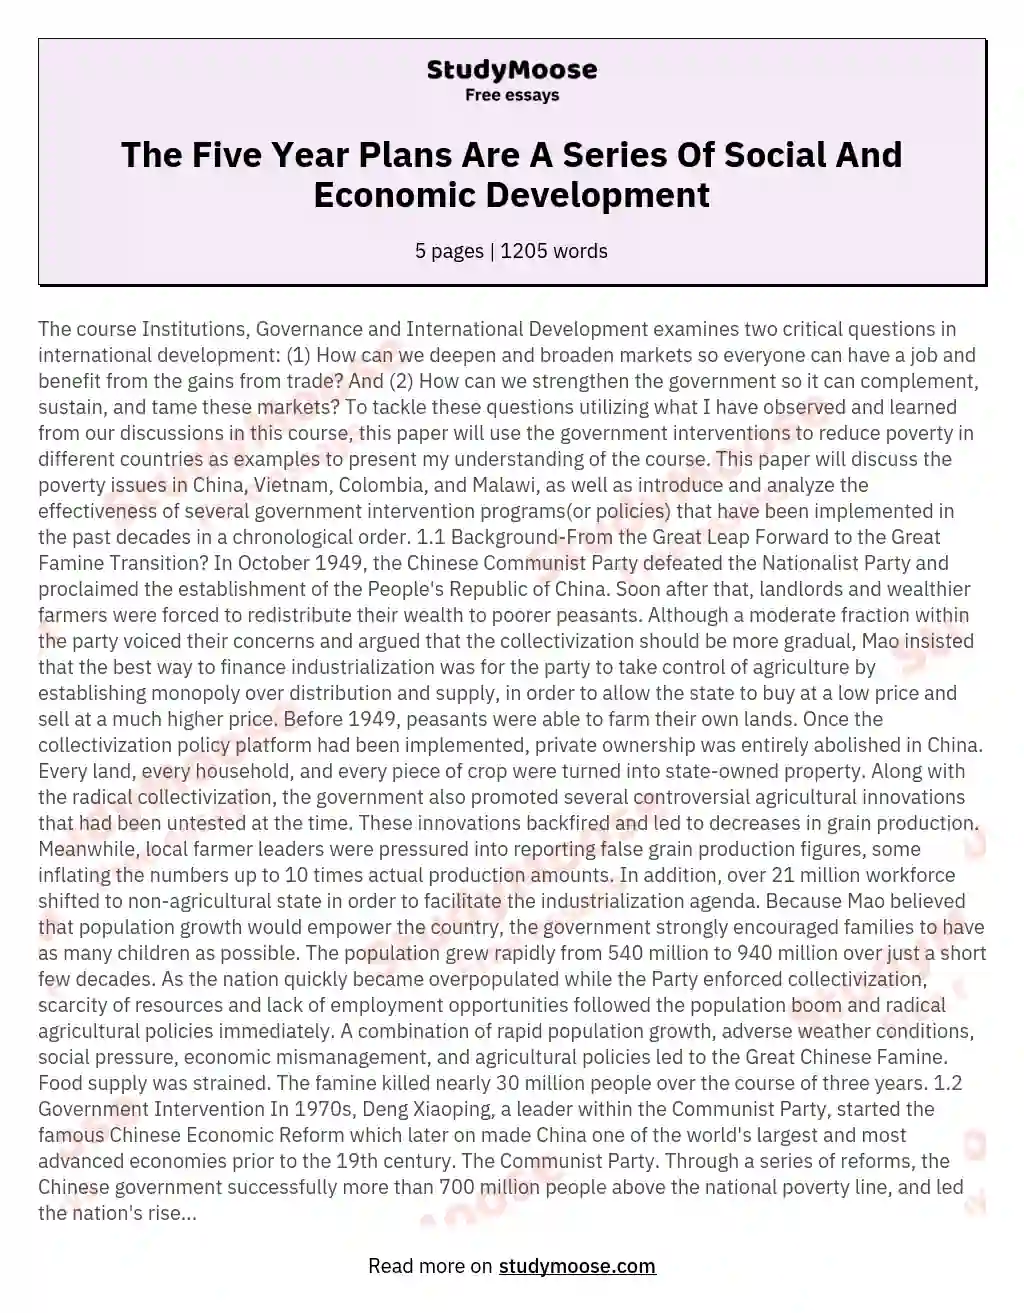 The Five Year Plans Are A Series Of Social And Economic Development essay